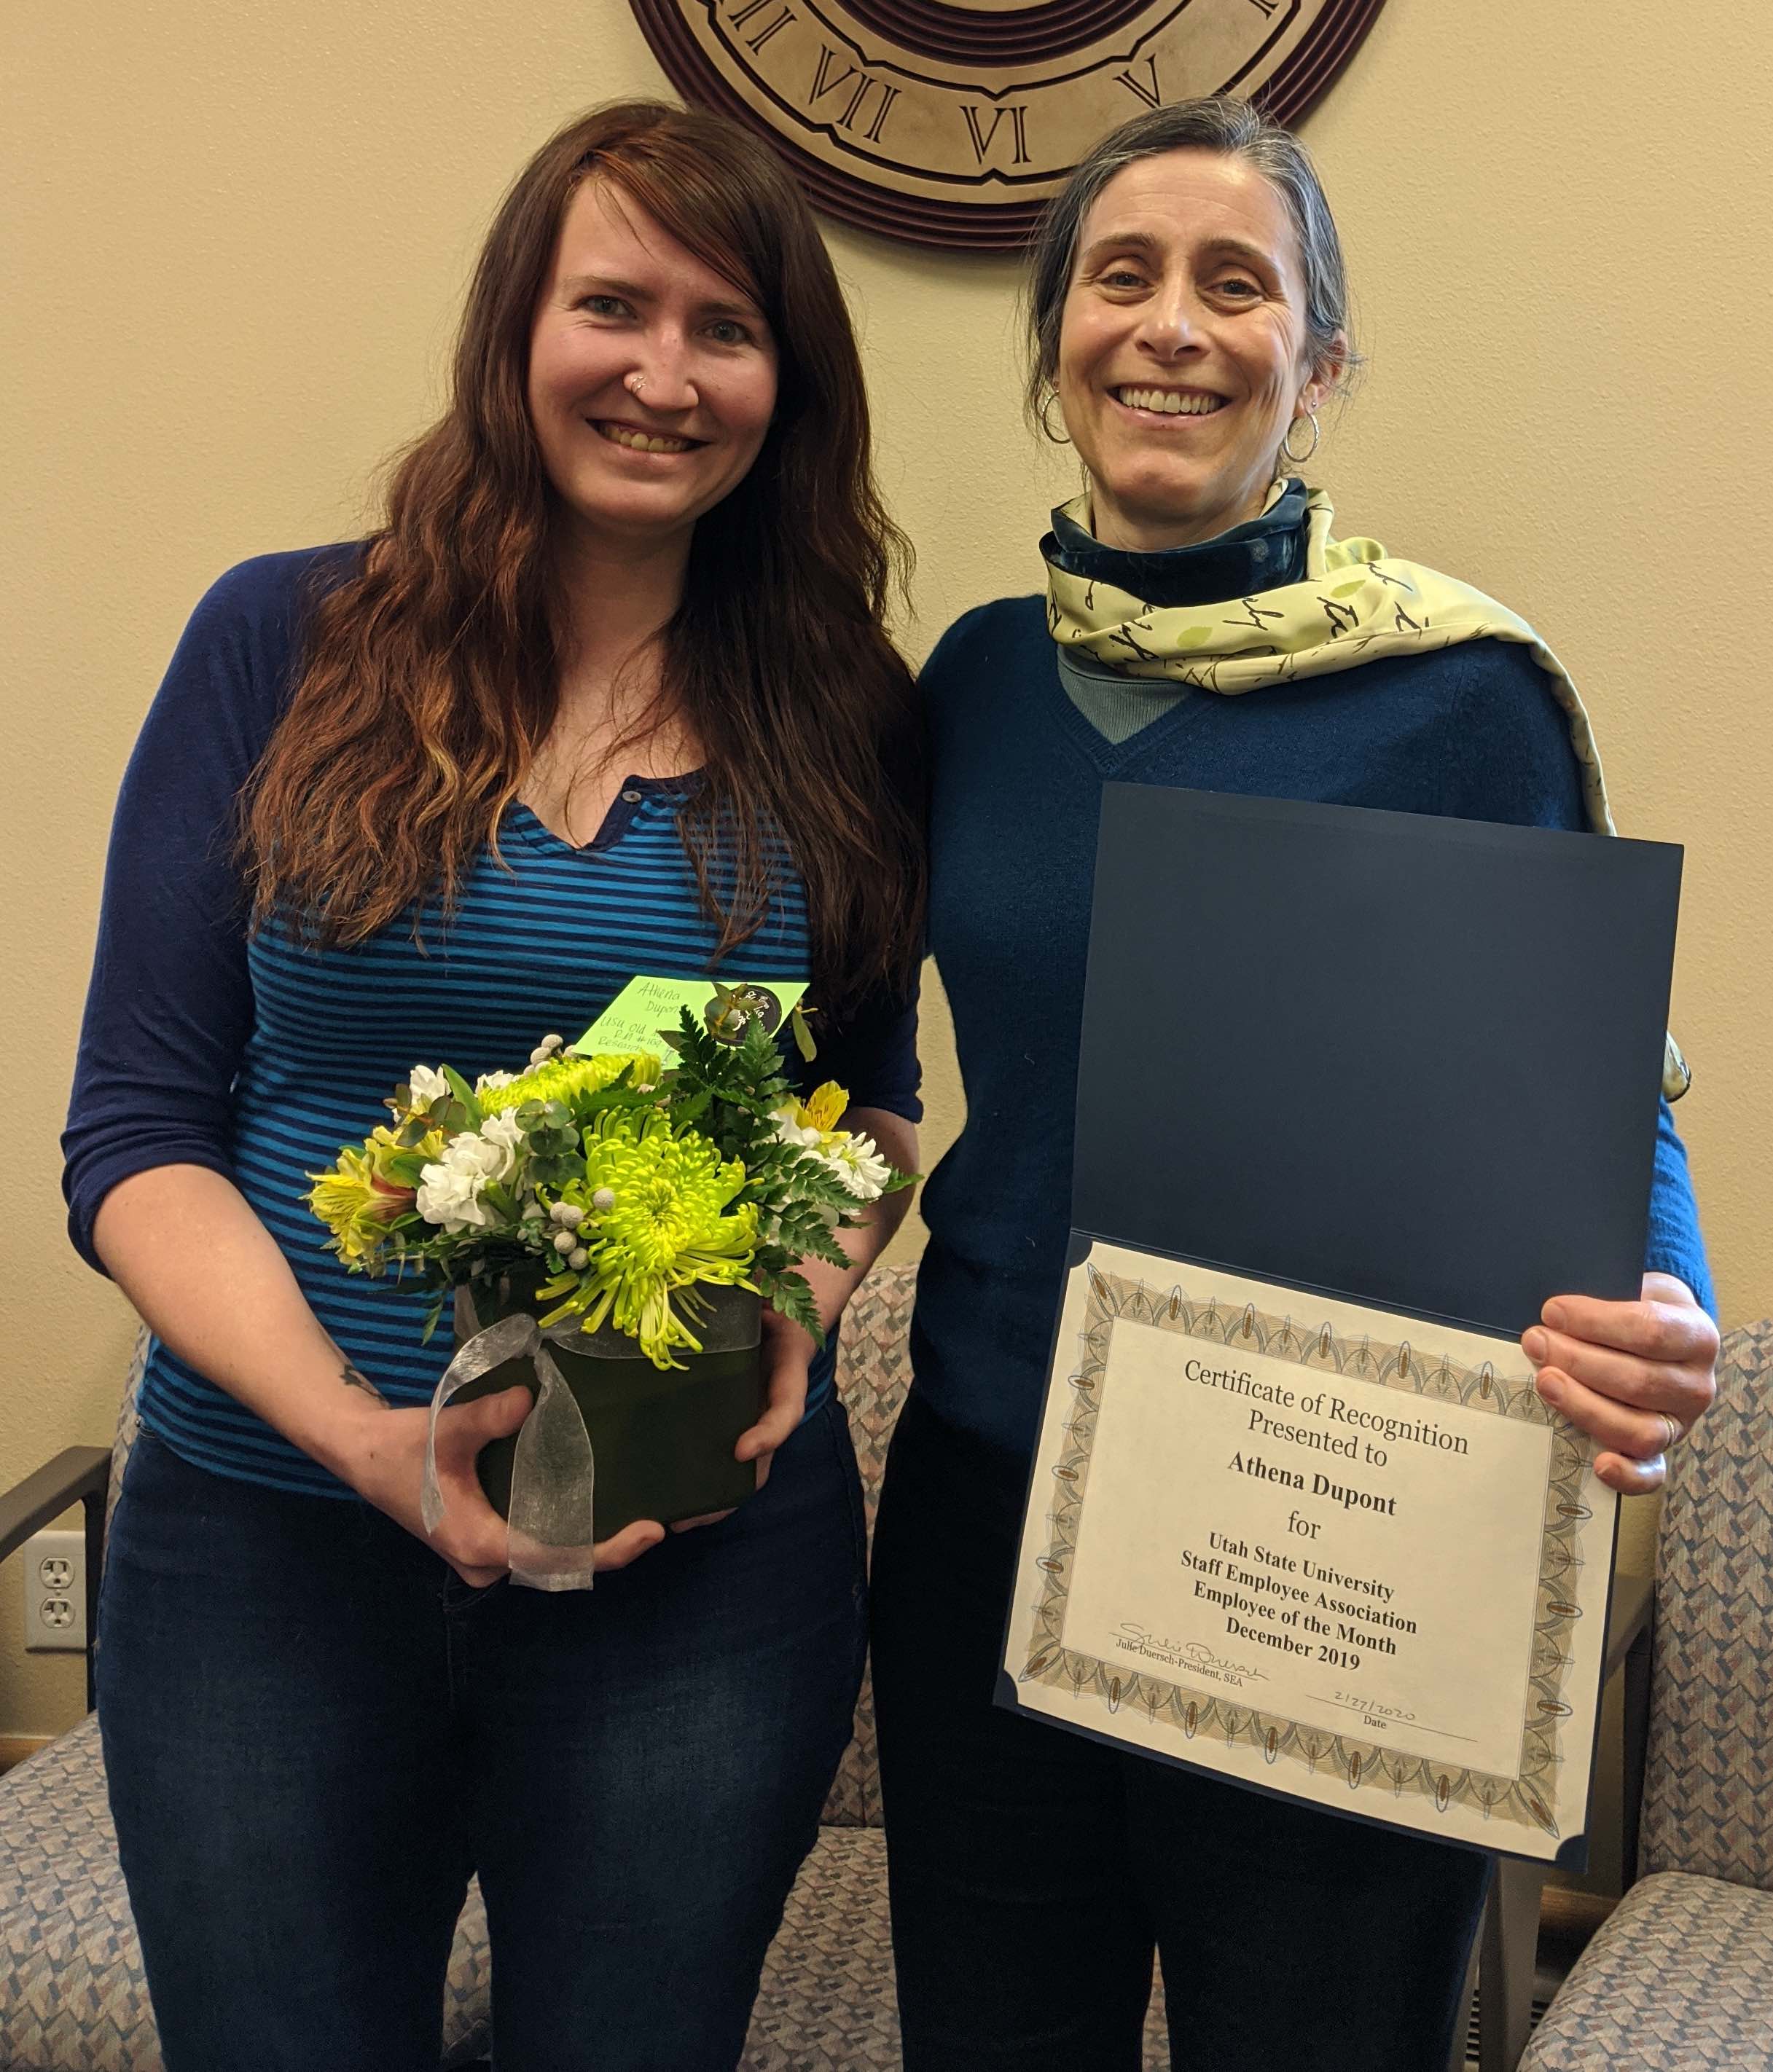 Athena Dupont, December 2019 Employee of the Month, with her nominator Alexa Sand